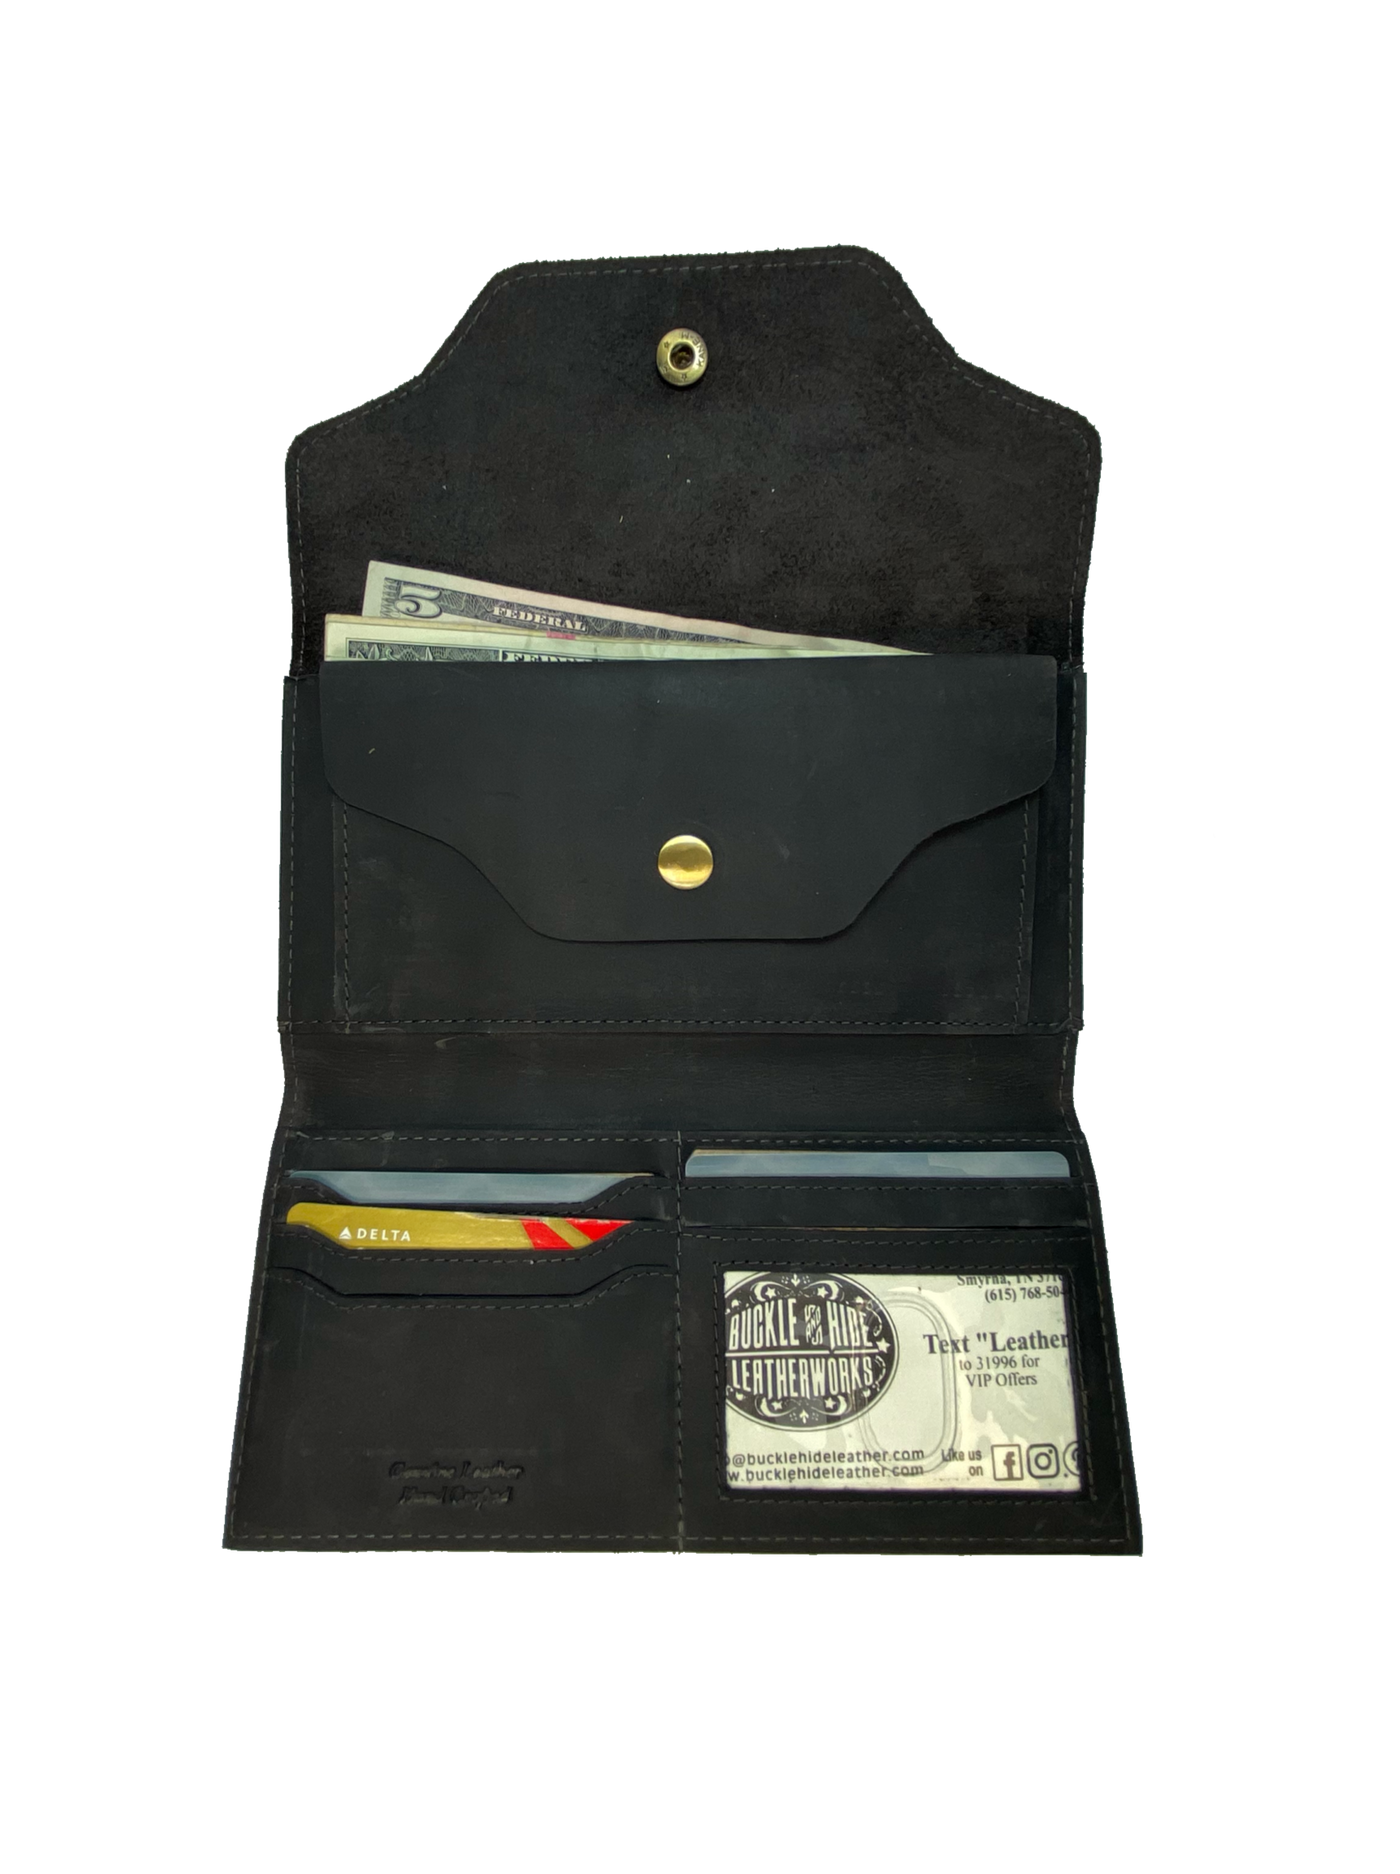 Leather Long Clutch Style Wallet with 4 card slots, I.D. slot, cash and coin pocket, zippered pocket. A convenient way to keep everything you need in one place! Imported and Buckle and Hide Approved! Available in Distressed Brown, Grey, Turquoise.